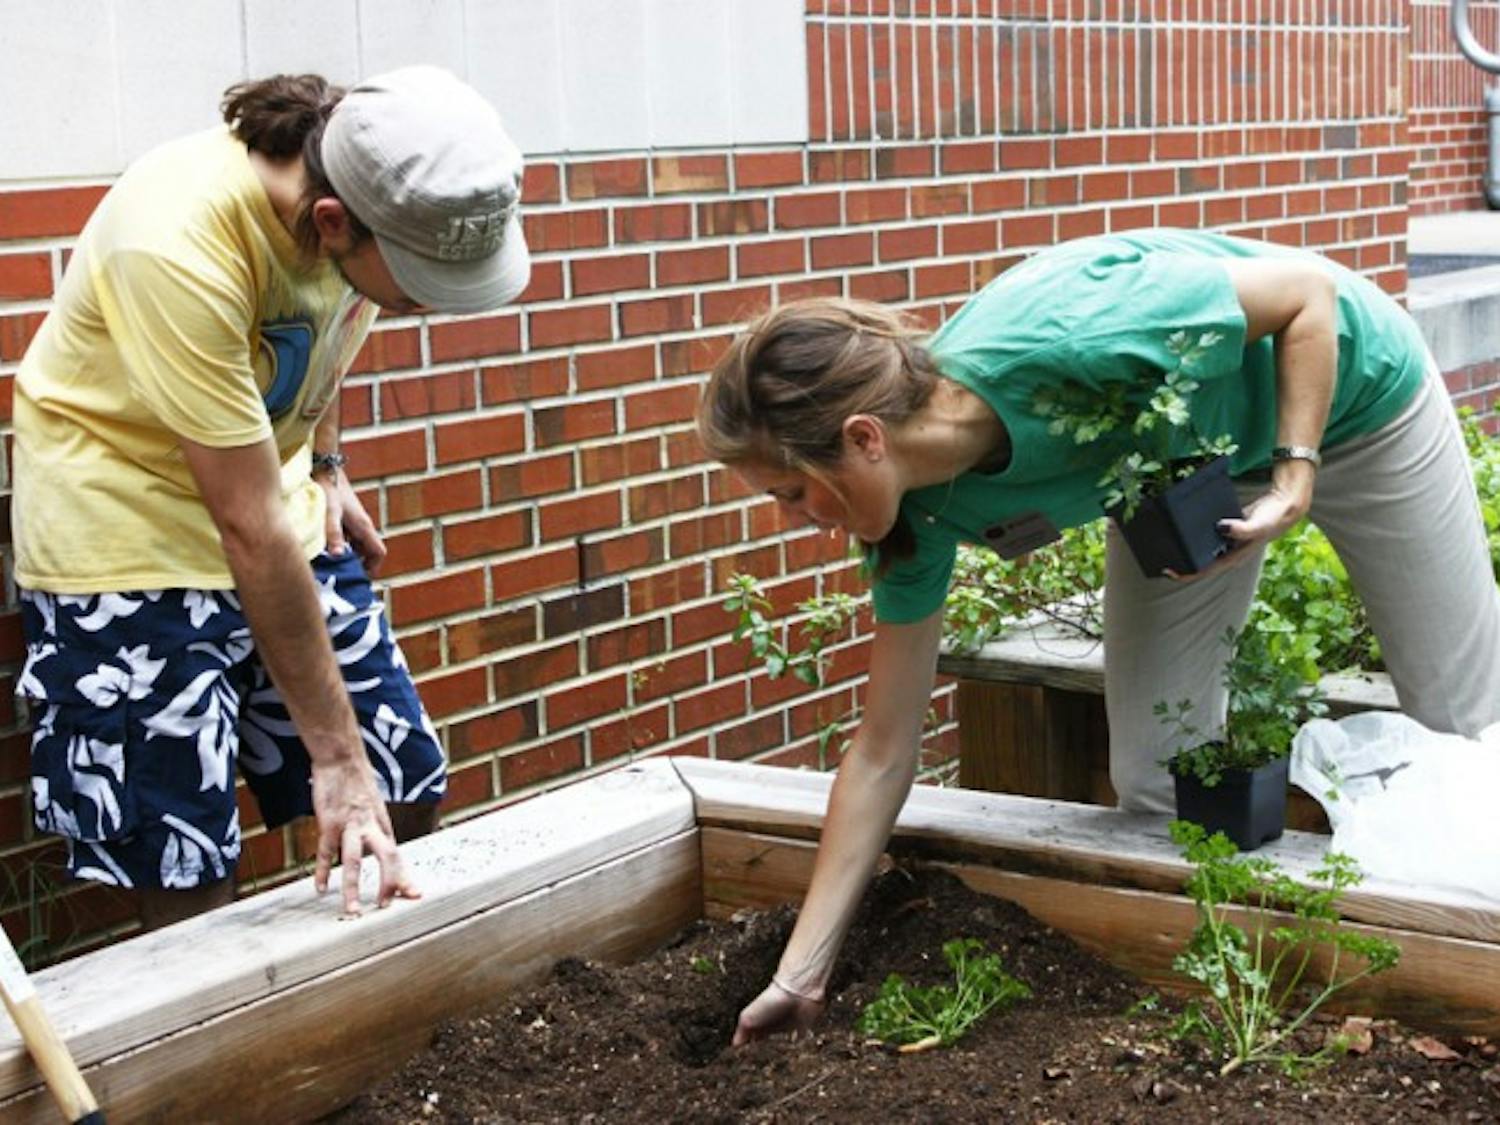 Entomology freshman Andre Szejner, 21, plants herbs next to Gator Corner Dining Center with Leah Chapman, sustainability manager for ARAMARK Higher Education.